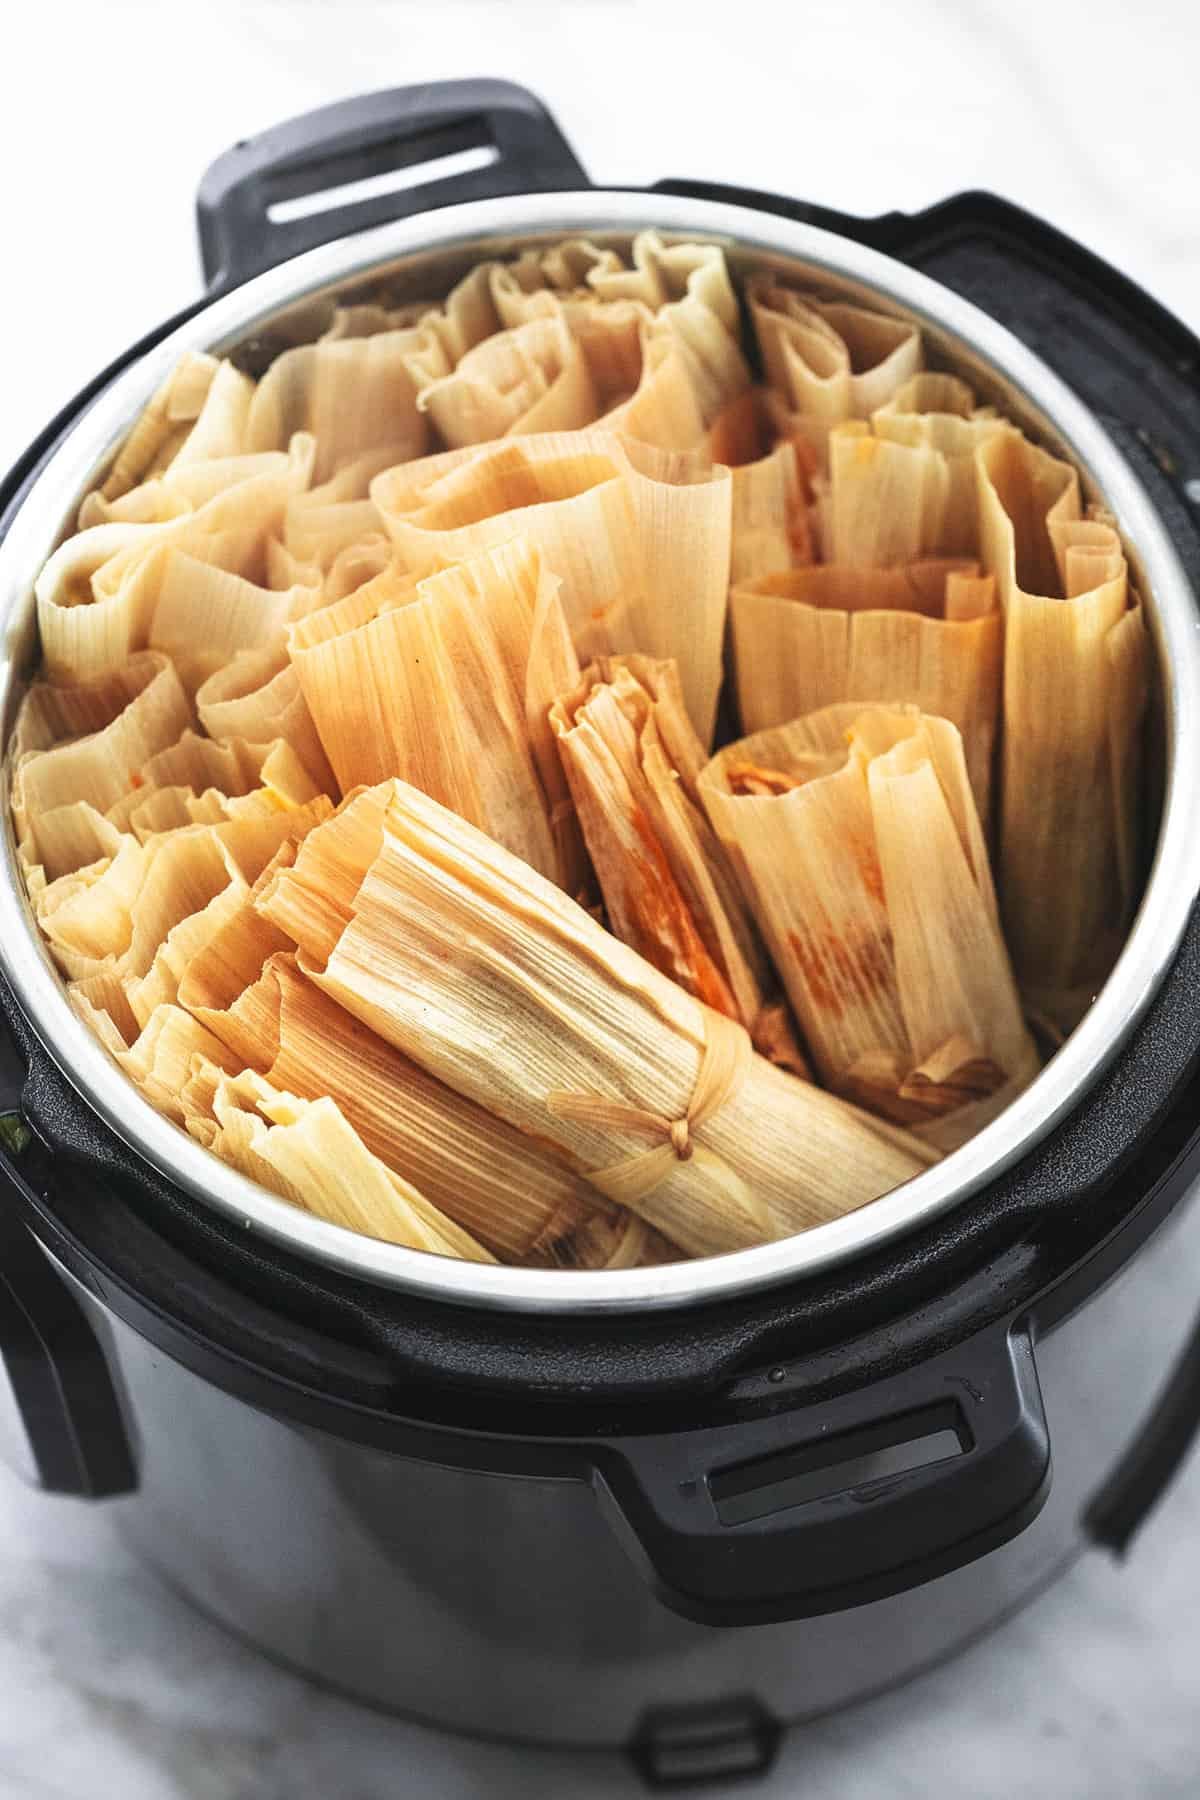 wrapped tamales in an instant pot.